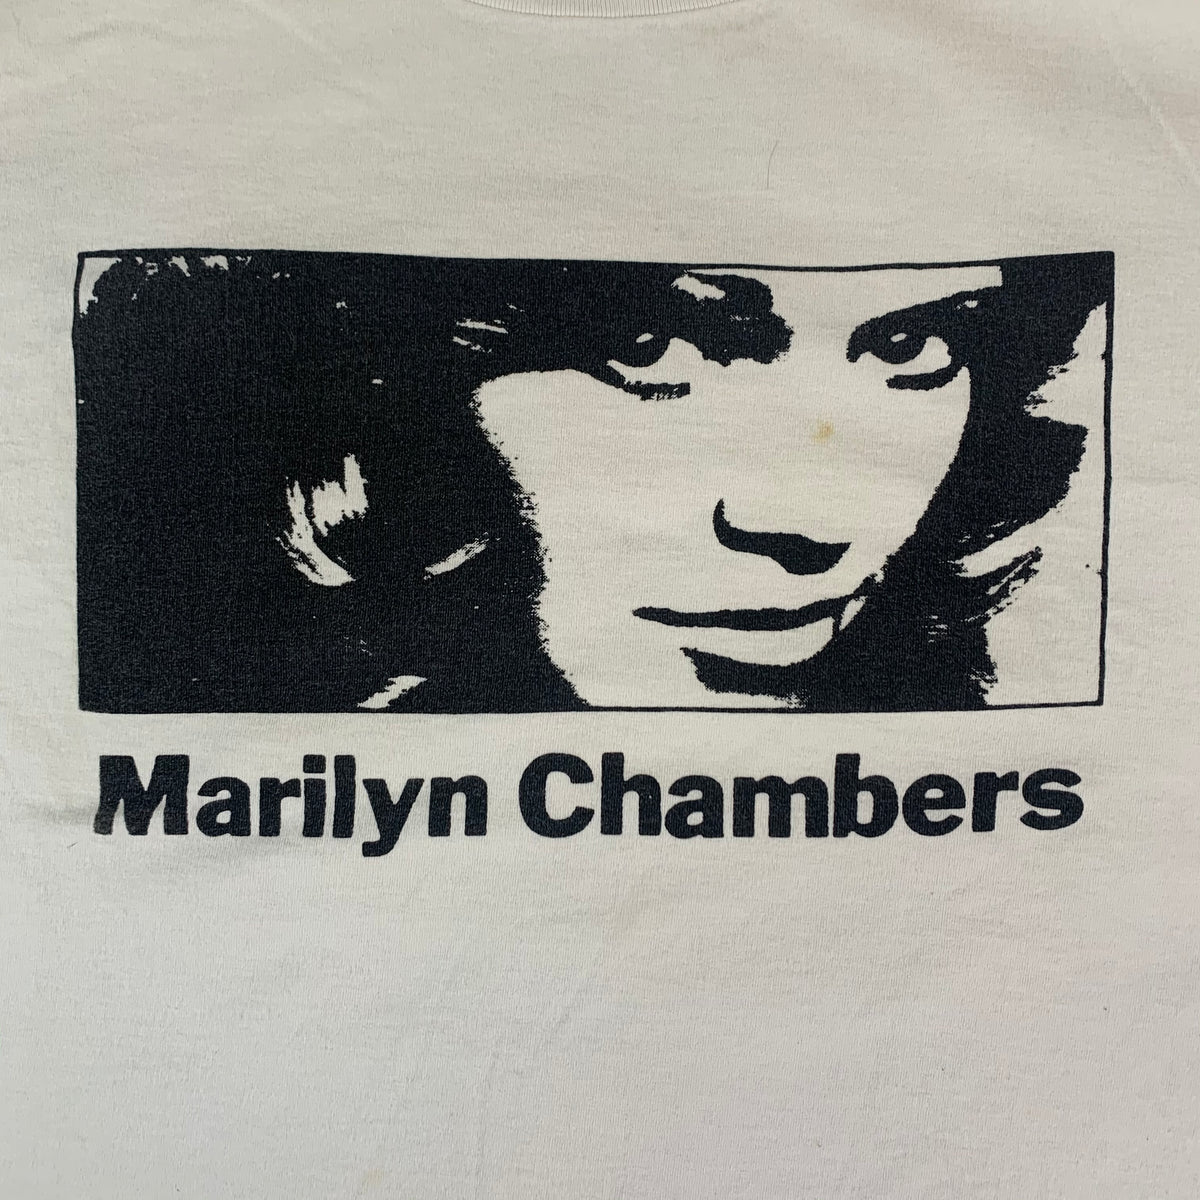 Vintage Marilyn Chambers “Ransom Note Graphics” T-Shirt